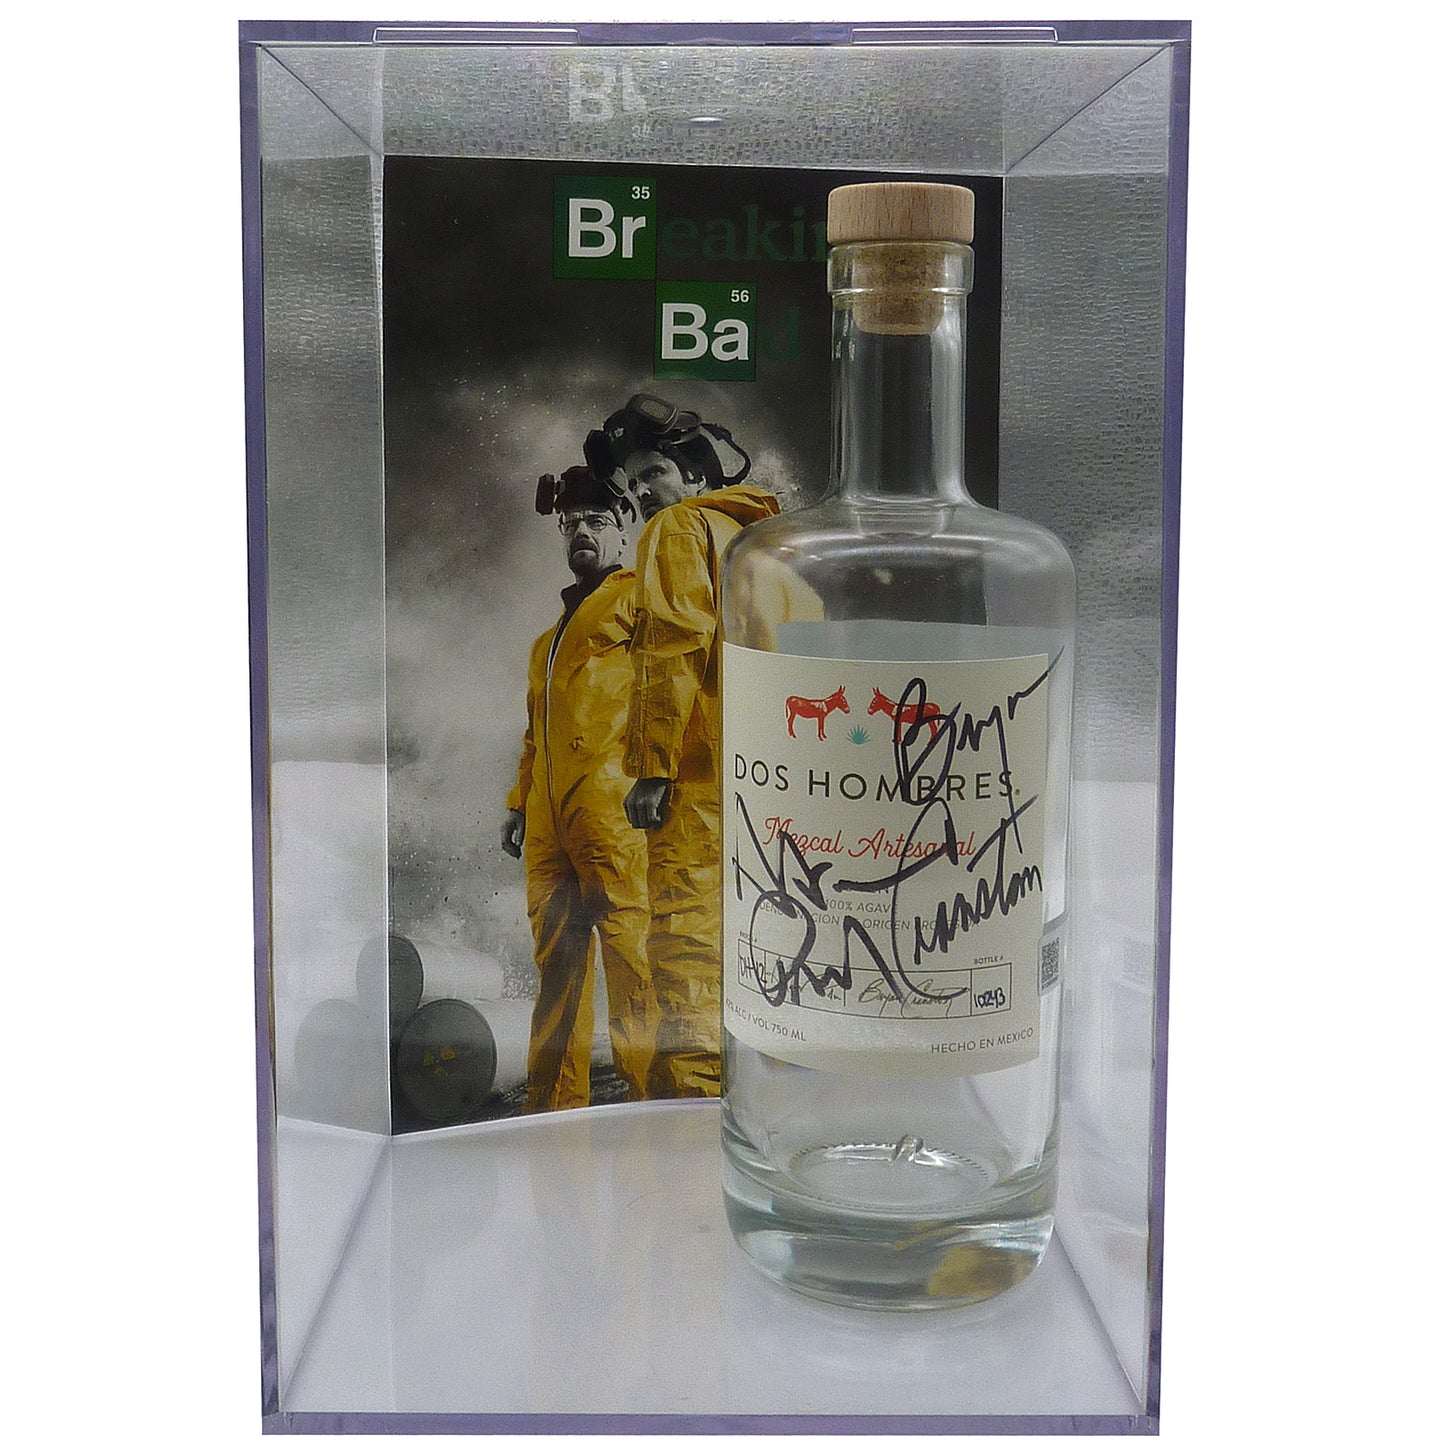 Bryan Cranston And Aaron Paul Autographed Dos Hombres Mezcal Tequila Bottle (Empty) in Display Case - JSA